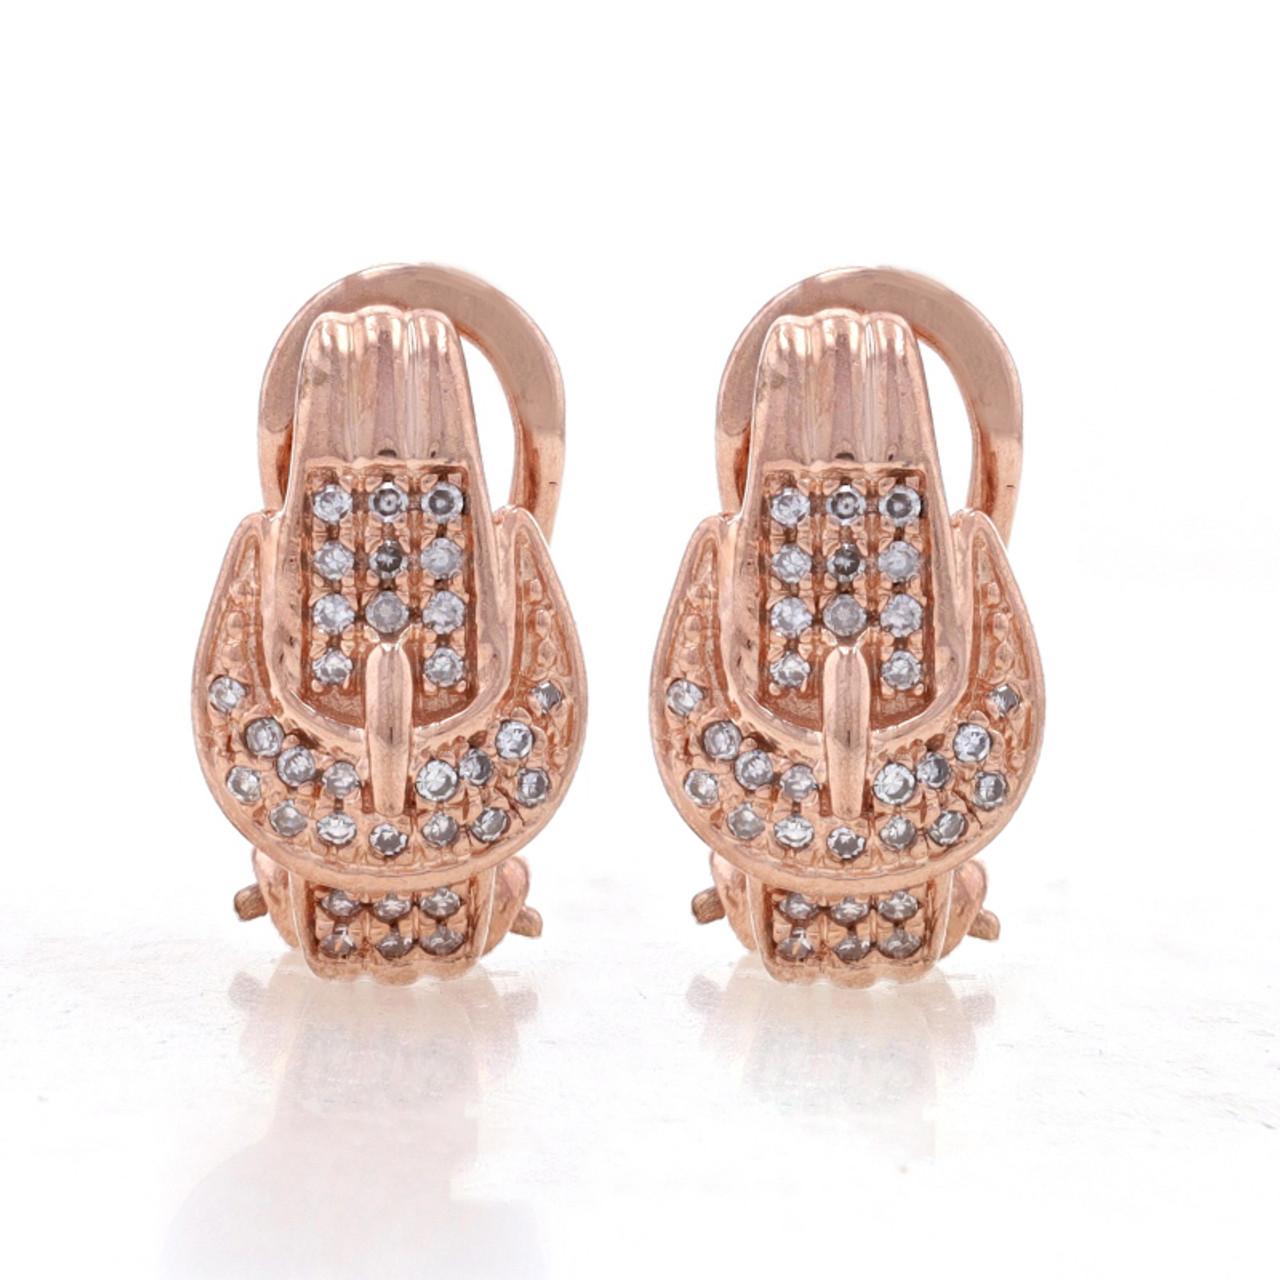 Sterling Diamond Buckle Earrings & Ring Set 925 Rose Gold Plate .30ctw Band Sz 7

Stone Information:
Natural Diamonds
Carat(s): .30ctw
Cut: Single
Color: F - G
Clarity: SI1 - I1

Total Carats: .30ctw

Additional information:
Material: Metal Sterling